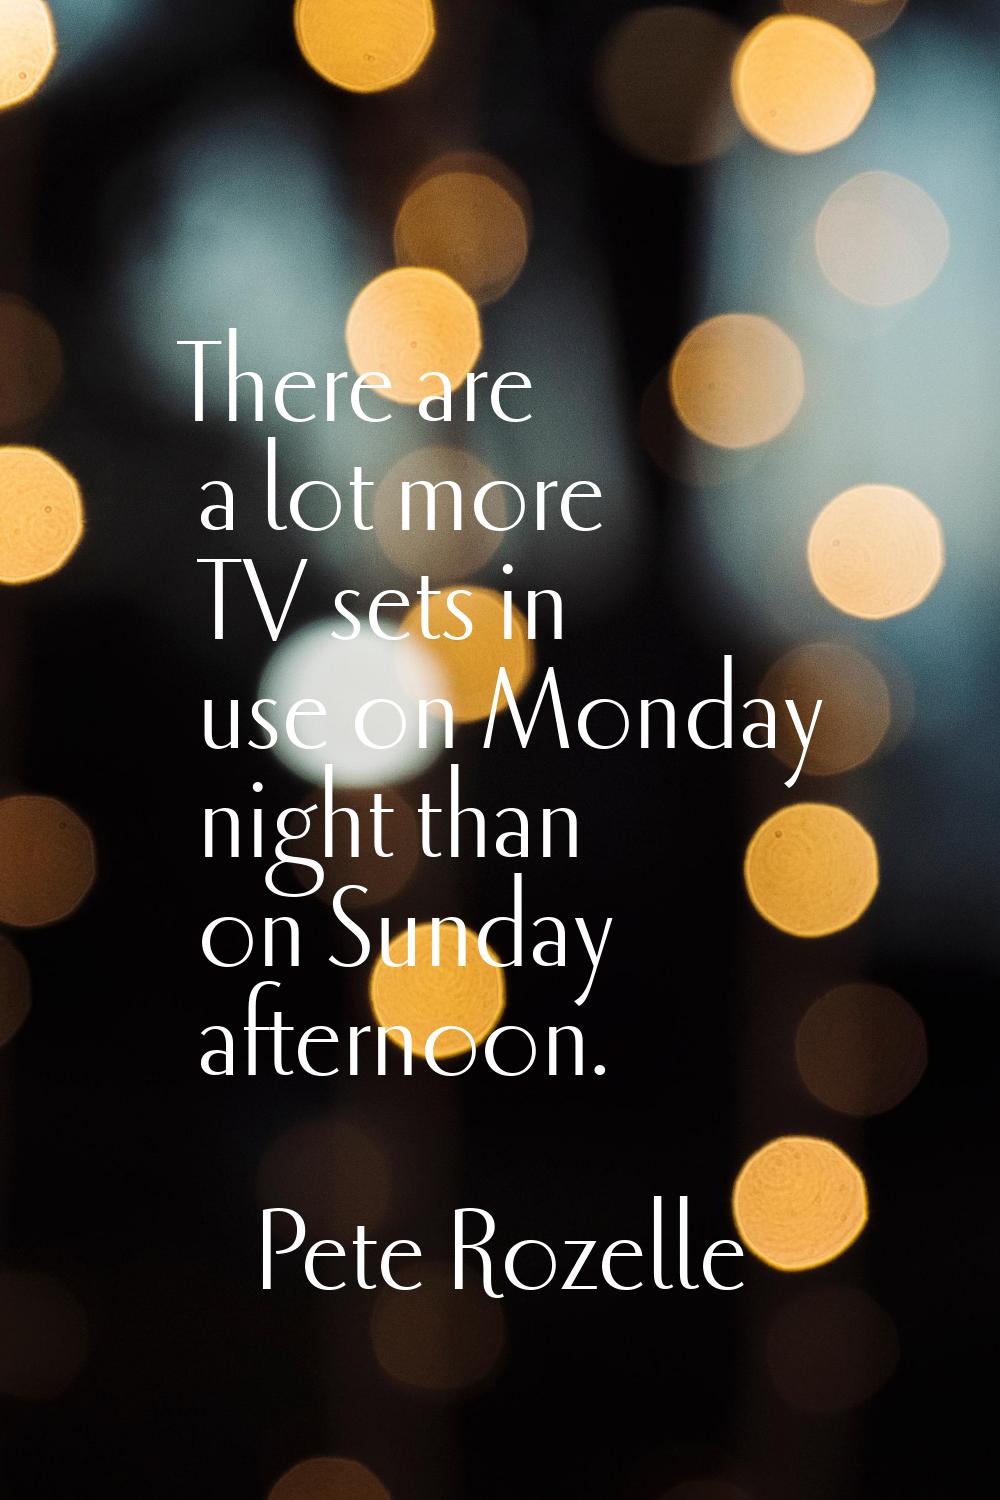 There are a lot more TV sets in use on Monday night than on Sunday afternoon.